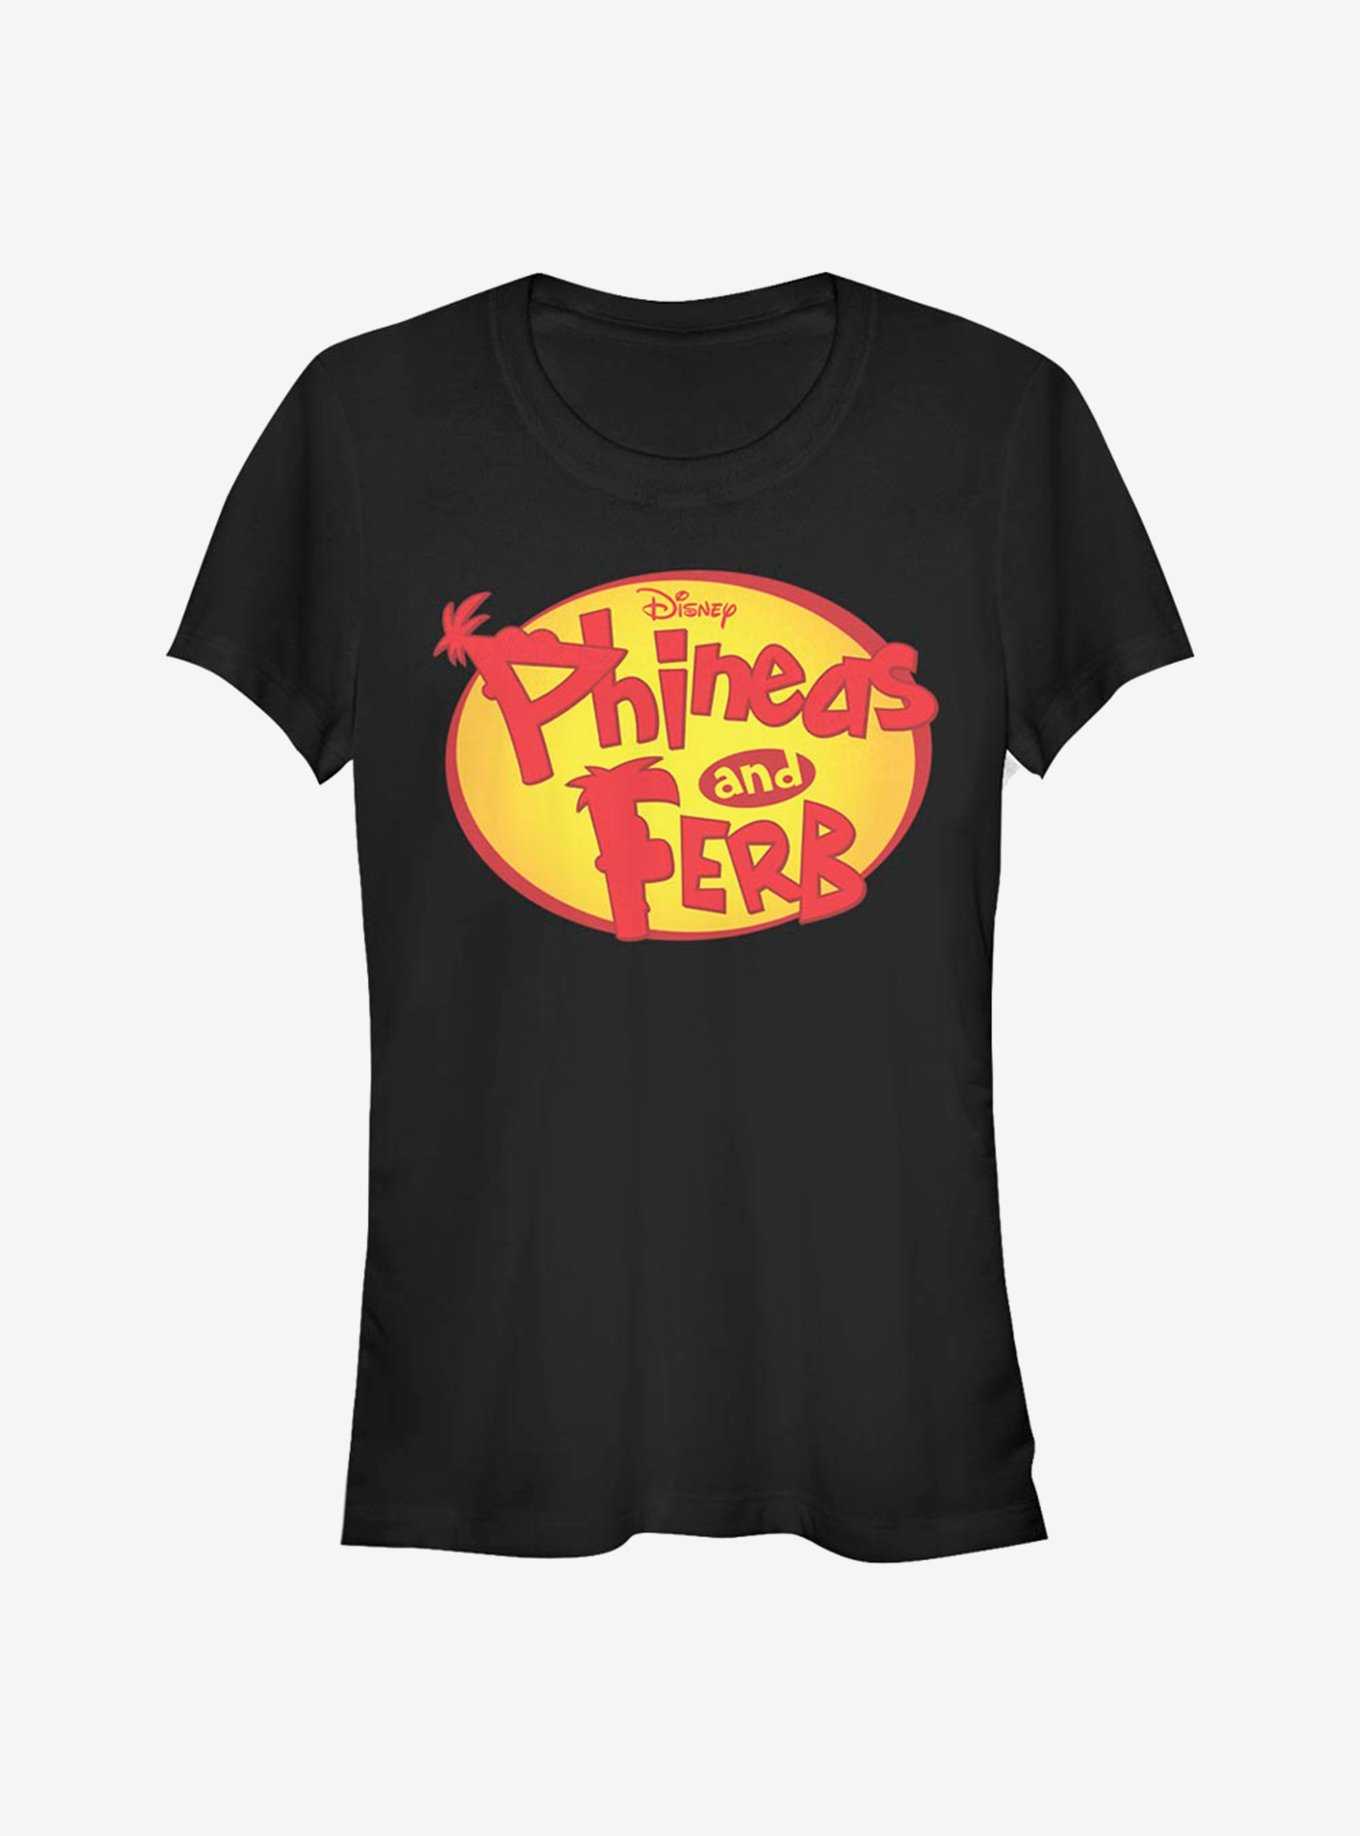 Disney Phineas And Ferb Oval Logo Girls T-Shirt, , hi-res